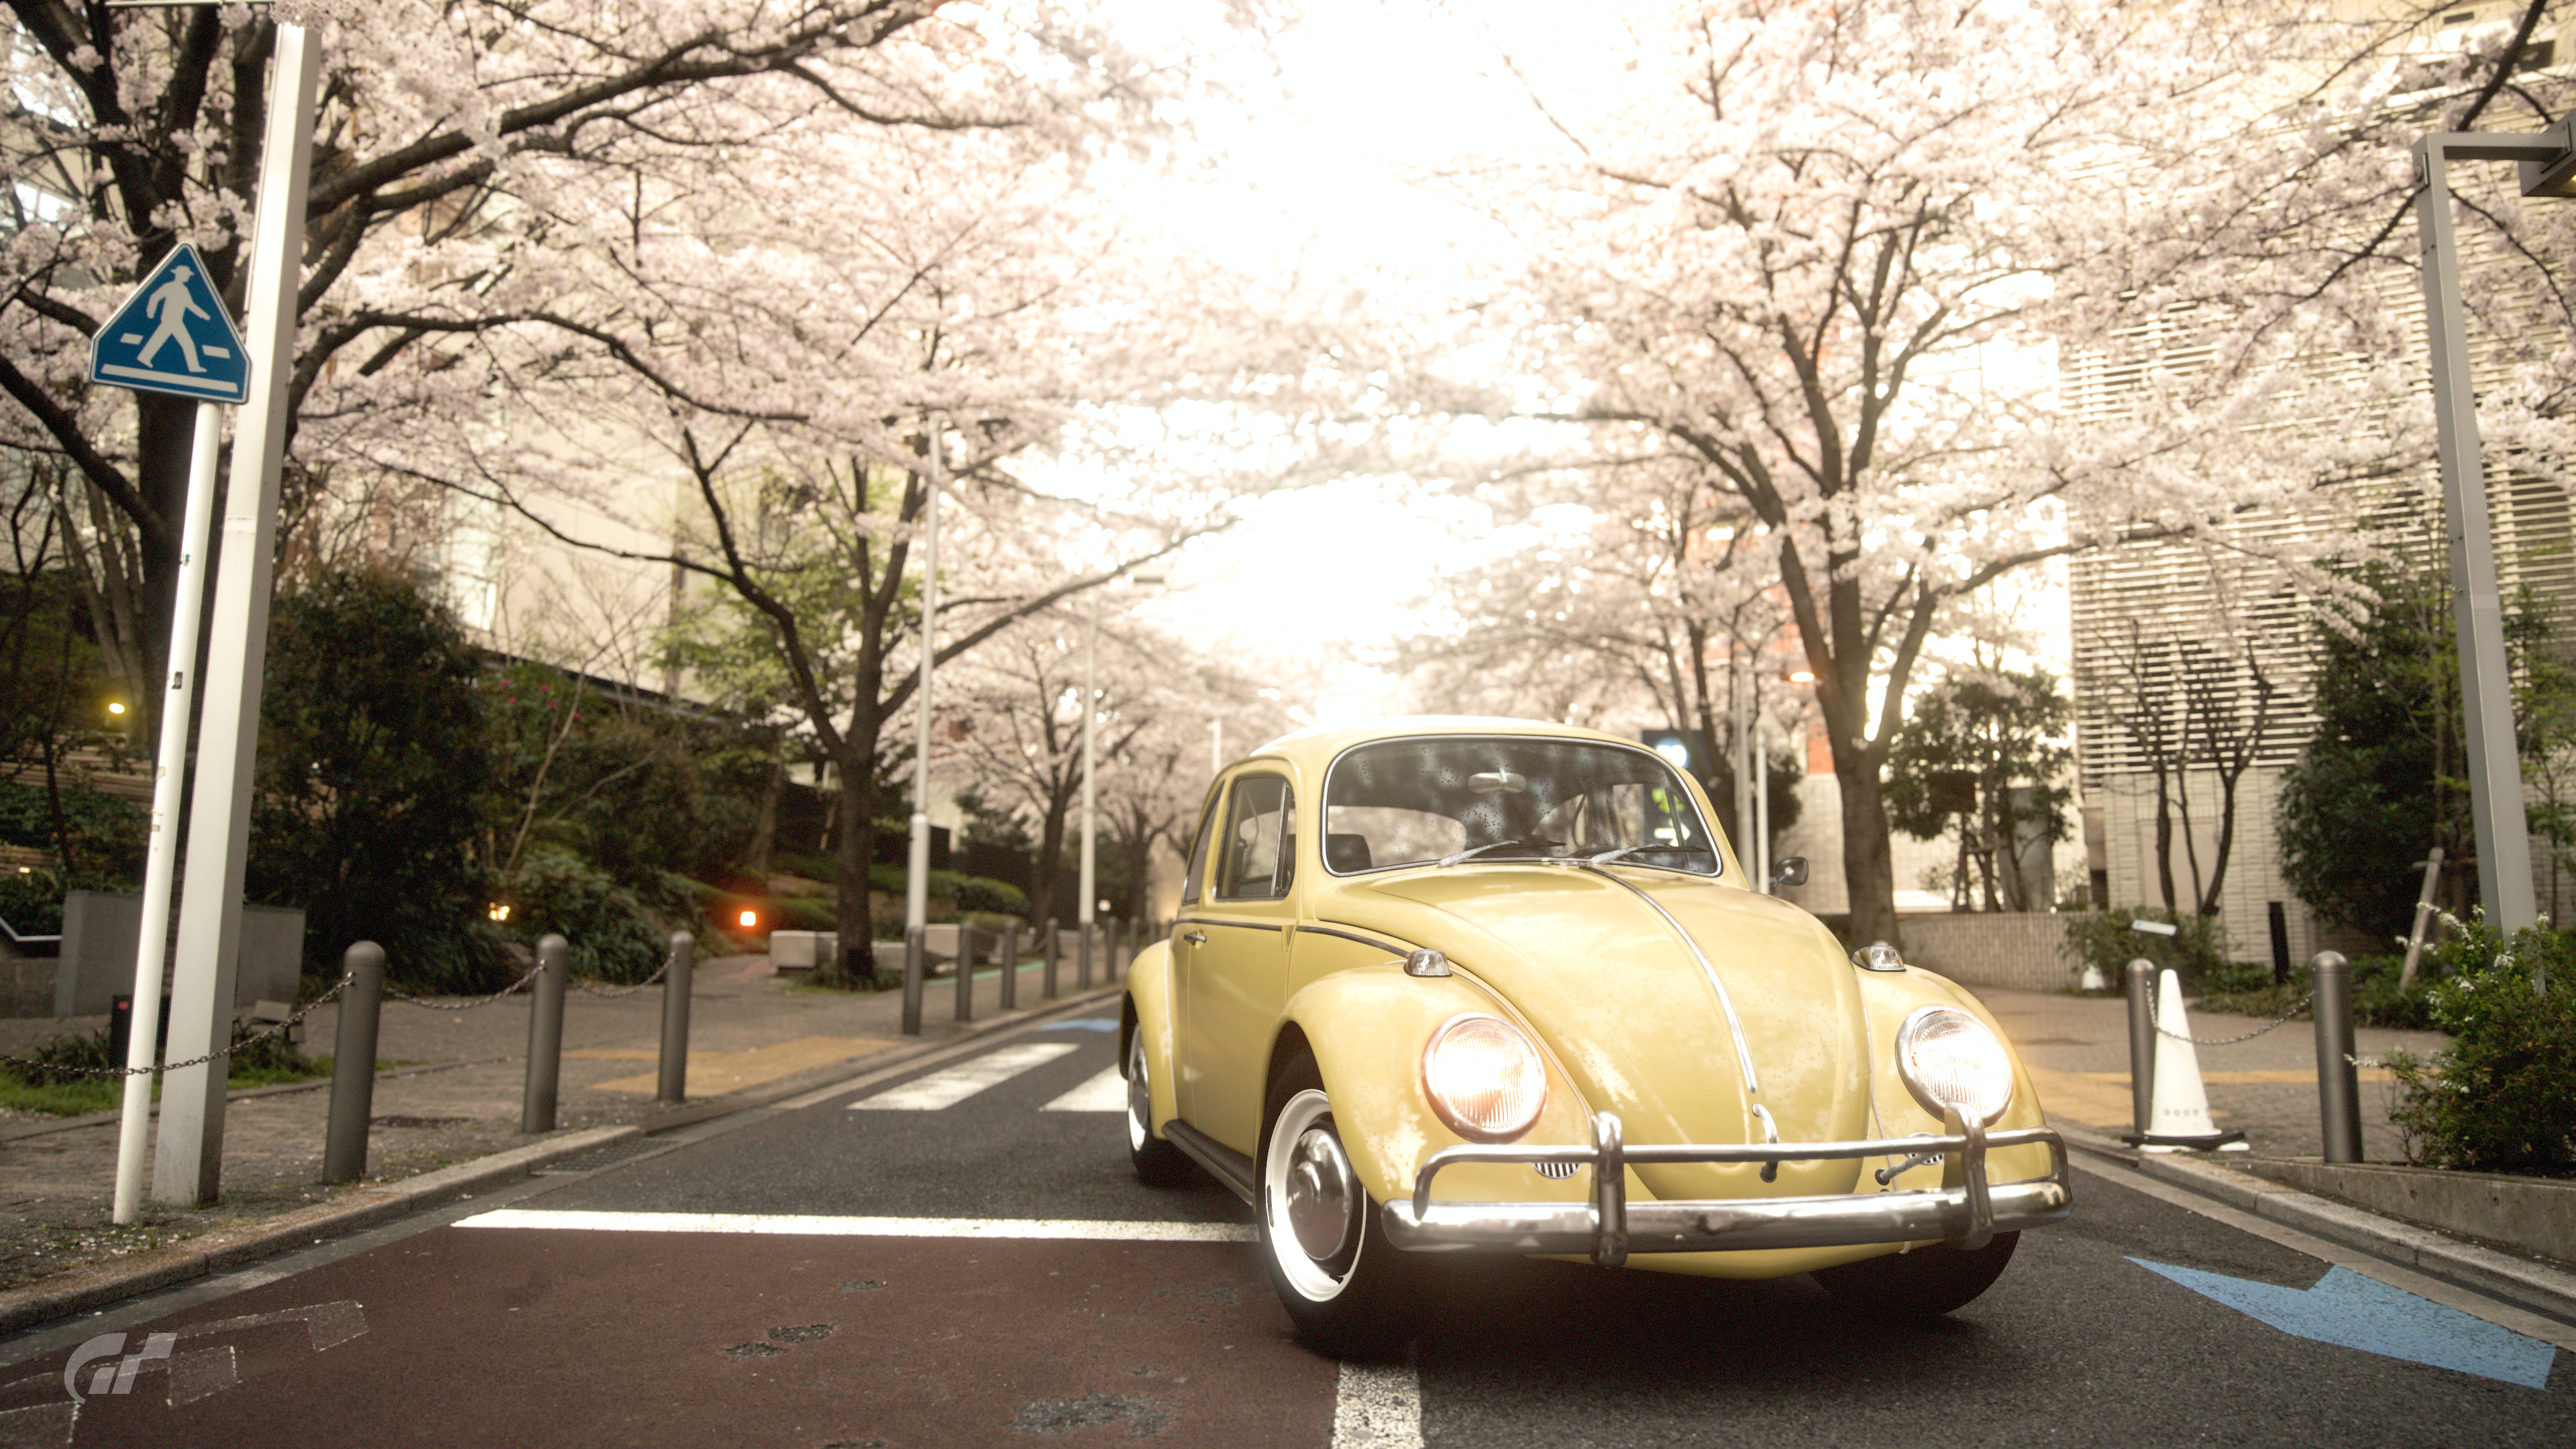 Nature Car Vehicle Video Games Gran Turismo 7 Volkswagen Beetle Cherry Blossom Japan Street Front An 3840x2160